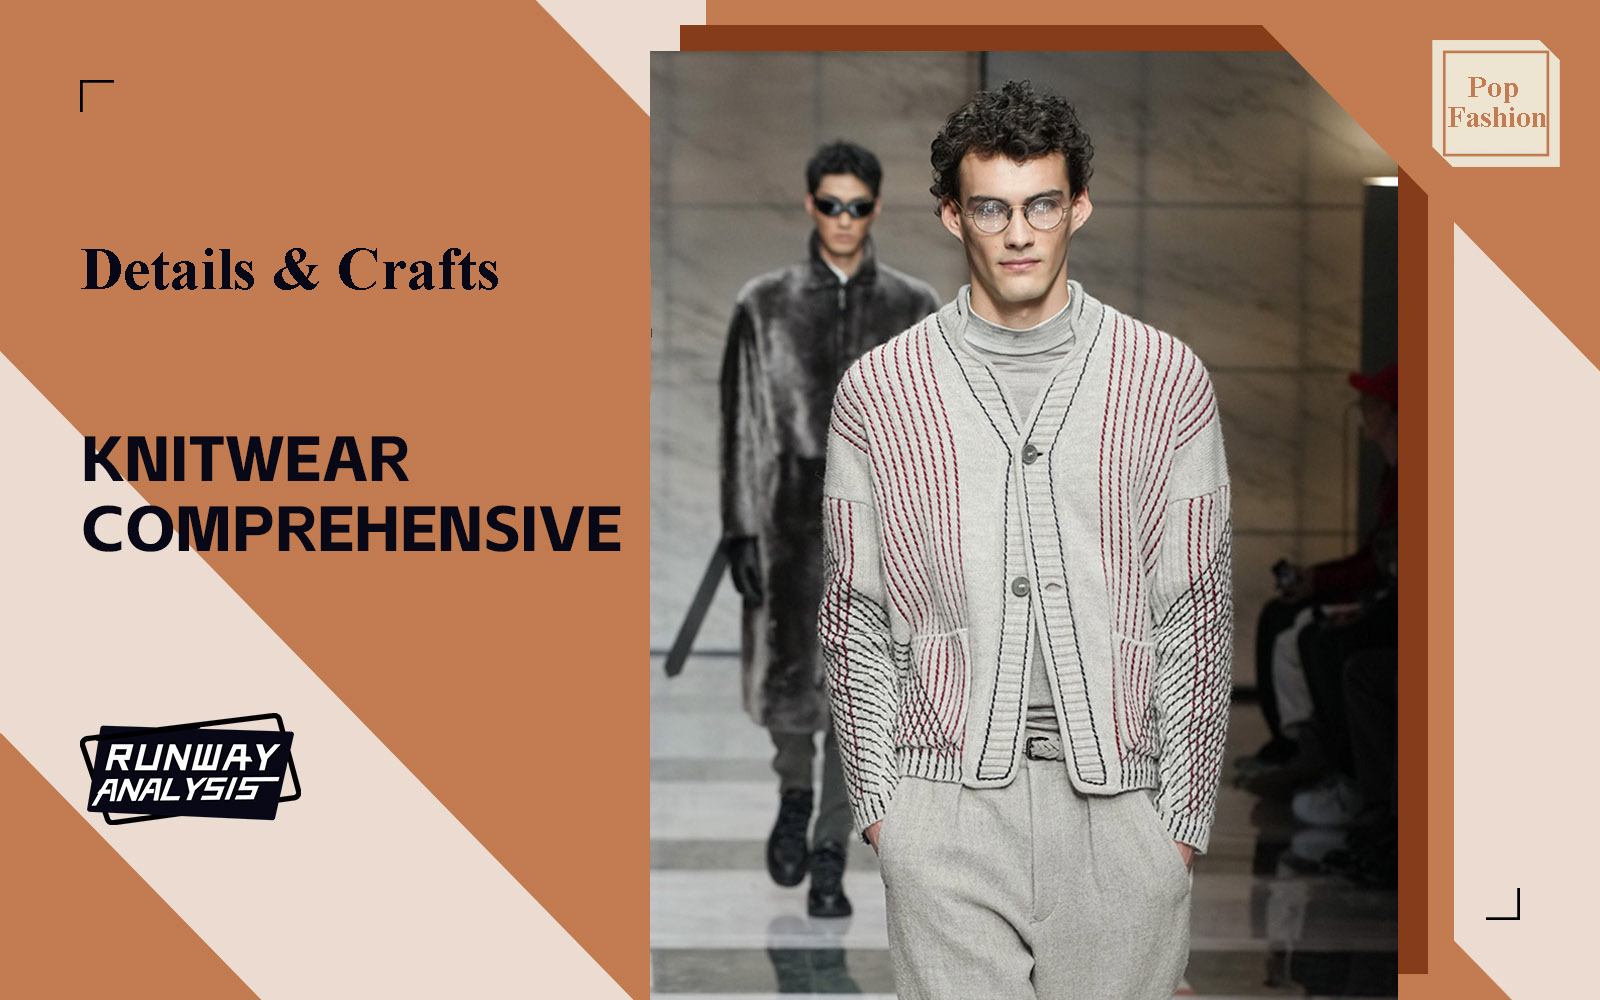 Details & Crafts -- The Comprehensive Runway Analysis of Men's Knitwear